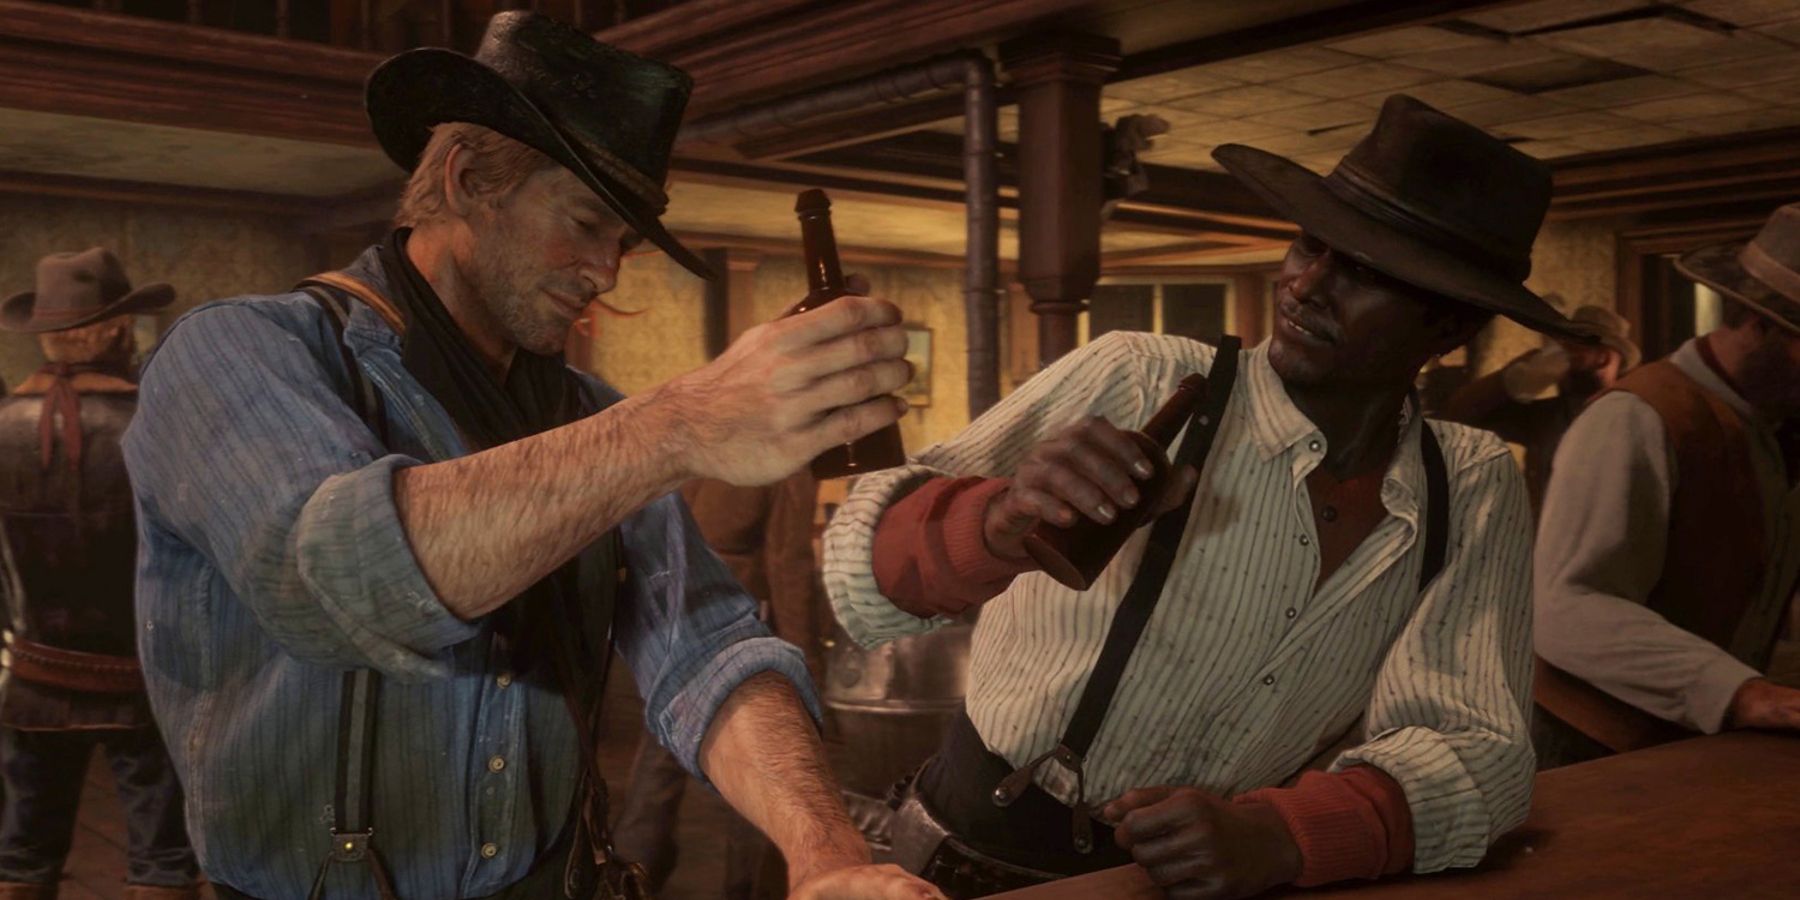 Hilarious Red Dead Redemption 2 Clip Shows Drunk Arthur Antagonizing the Gang at Camp